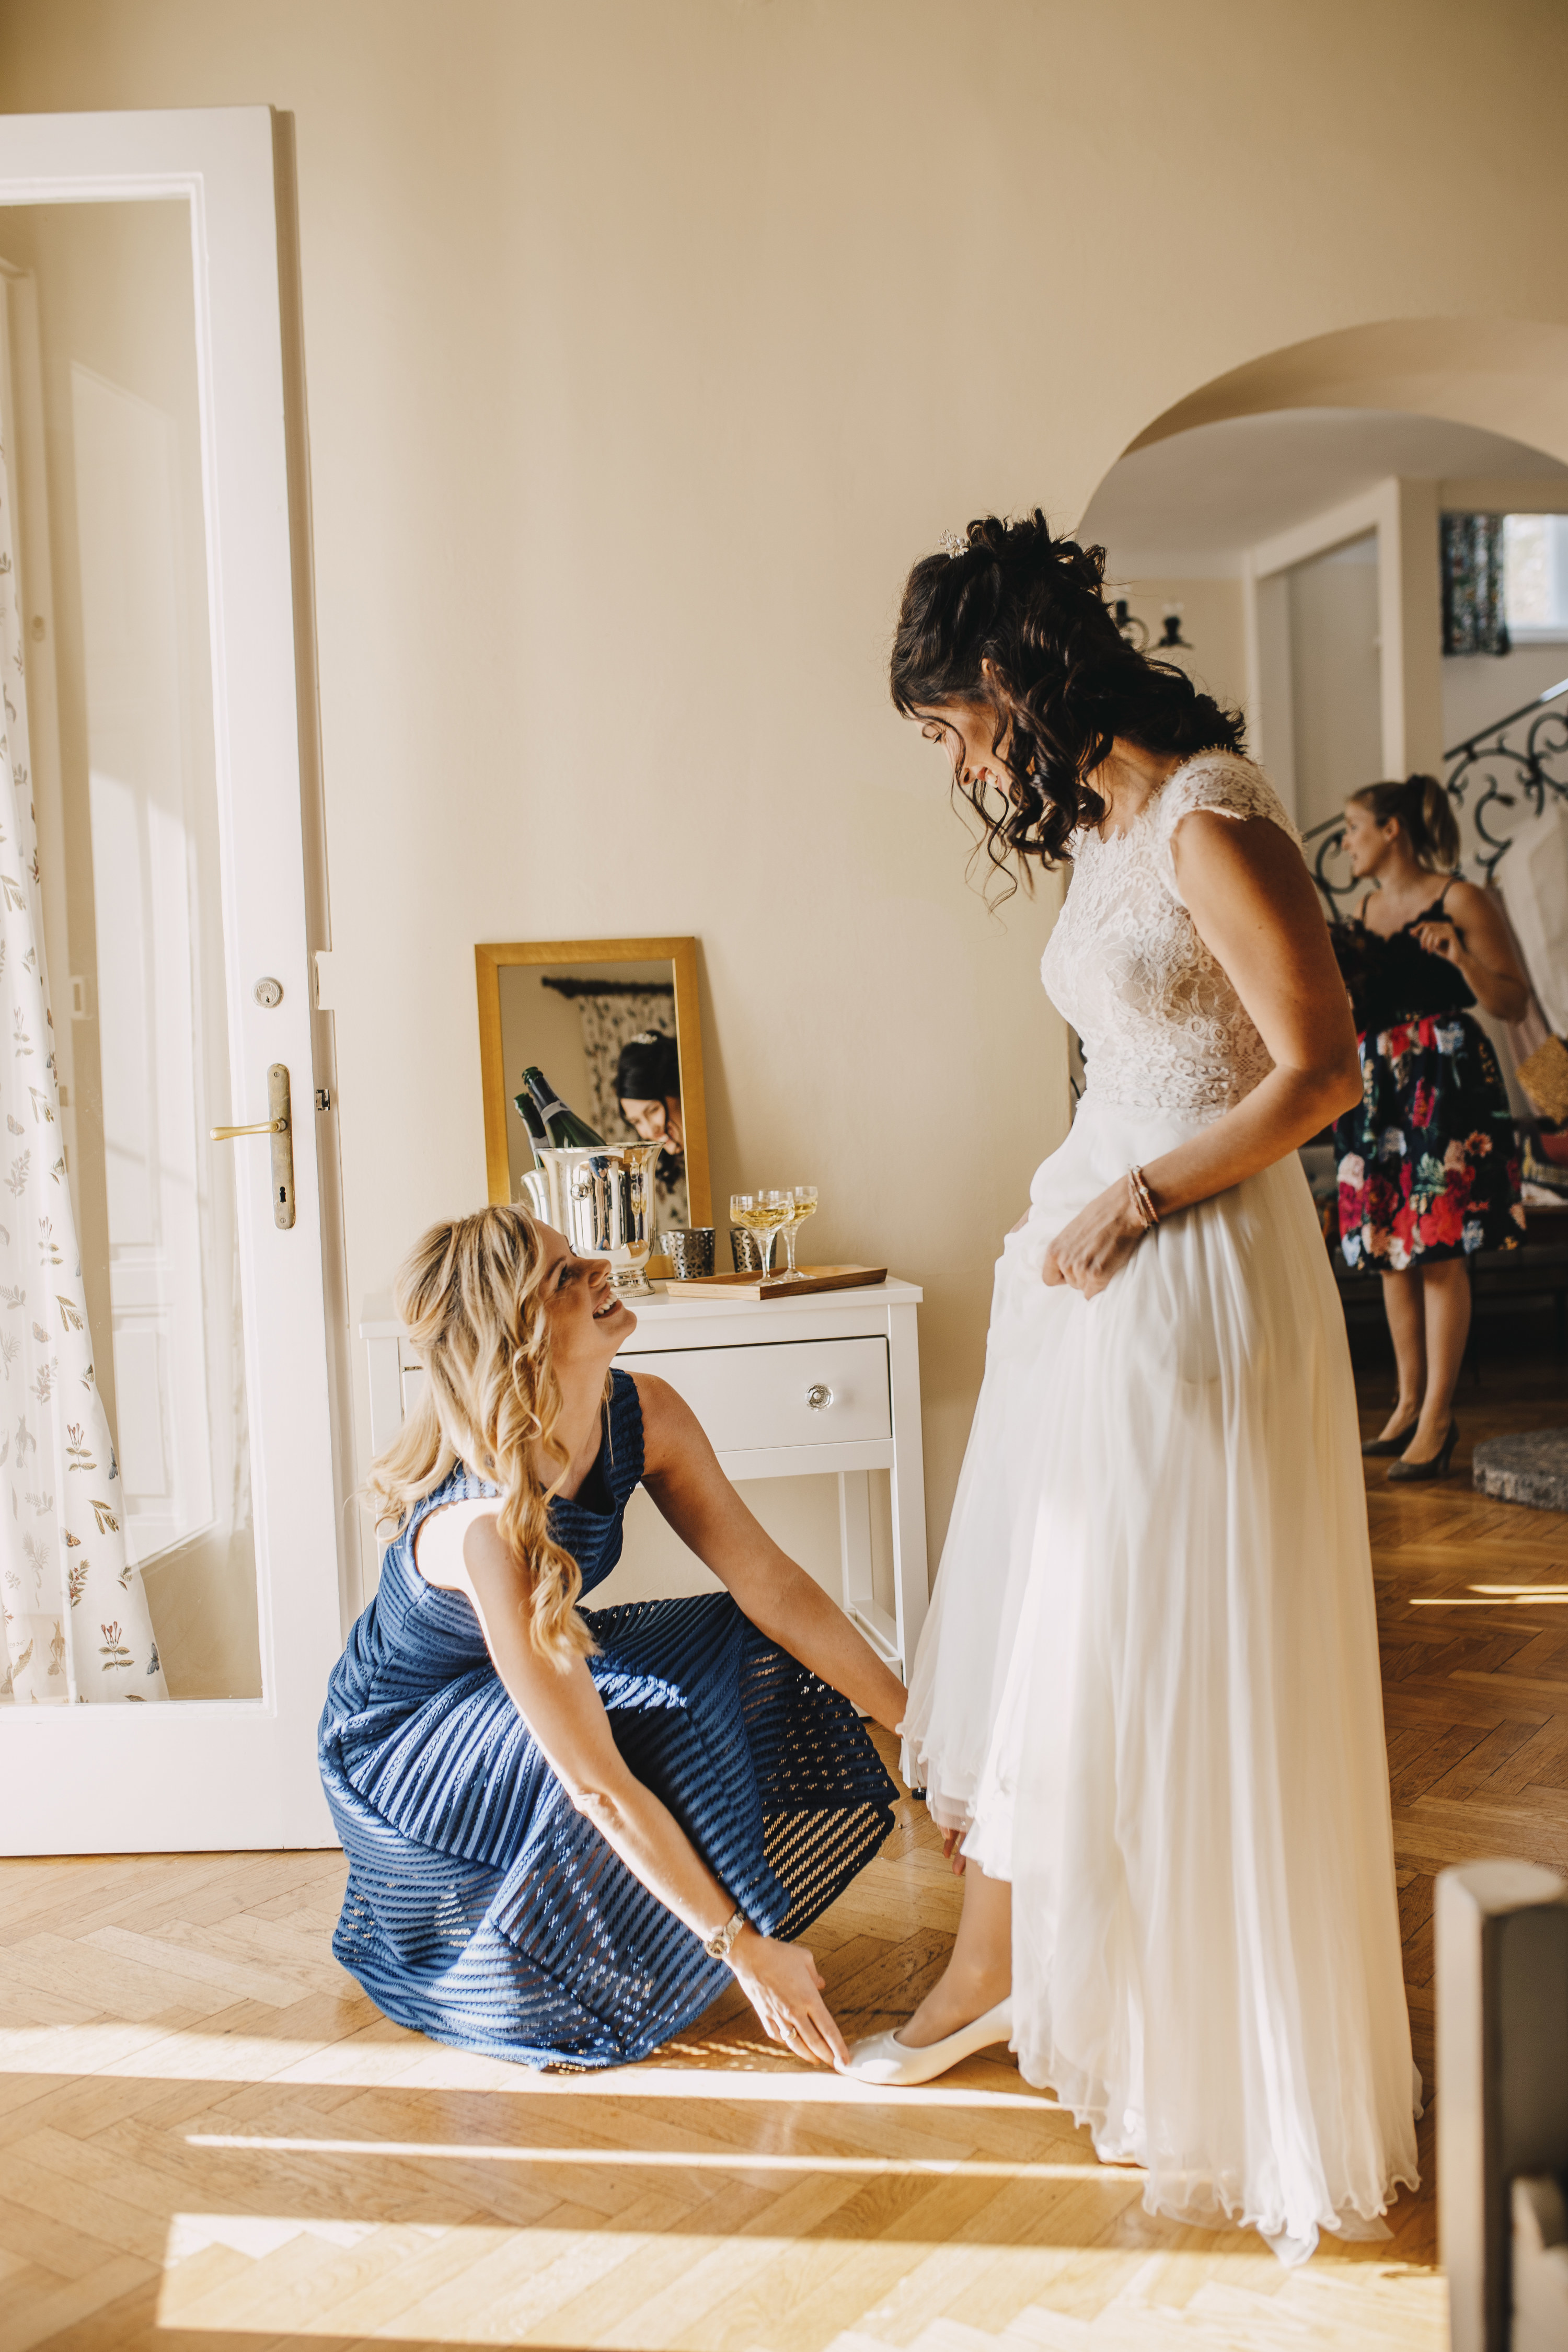 Maid of honor kneeling down and smiling at bride. She helps the bride with her shoe